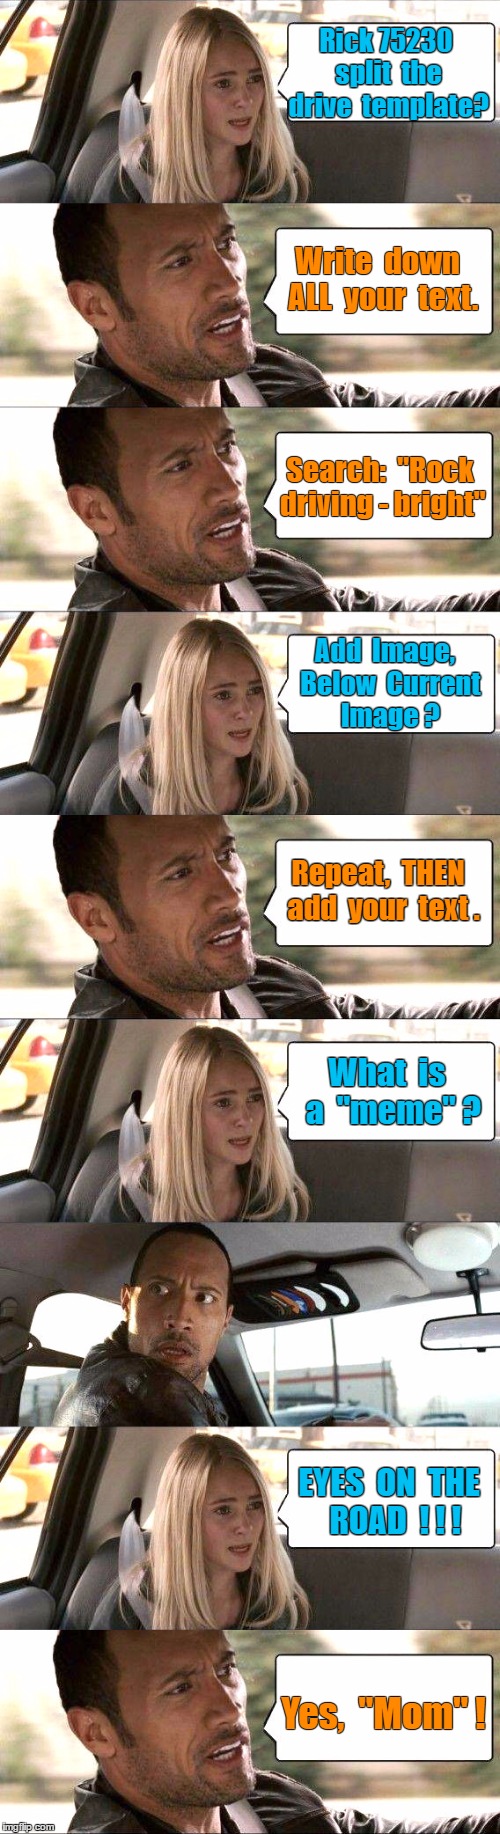 How to Merge Meme Templates - Rock driving example | Rick 75230  split  the  drive  template? Write  down  ALL  your  text. Search:  "Rock driving - bright"; Add  Image,  Below  Current  Image ? Repeat,  THEN  add  your  text . What  is  a  "meme" ? EYES  ON  THE  ROAD  ! ! ! Yes,  "Mom" ! | image tagged in the rock driving,memes,meme how to | made w/ Imgflip meme maker